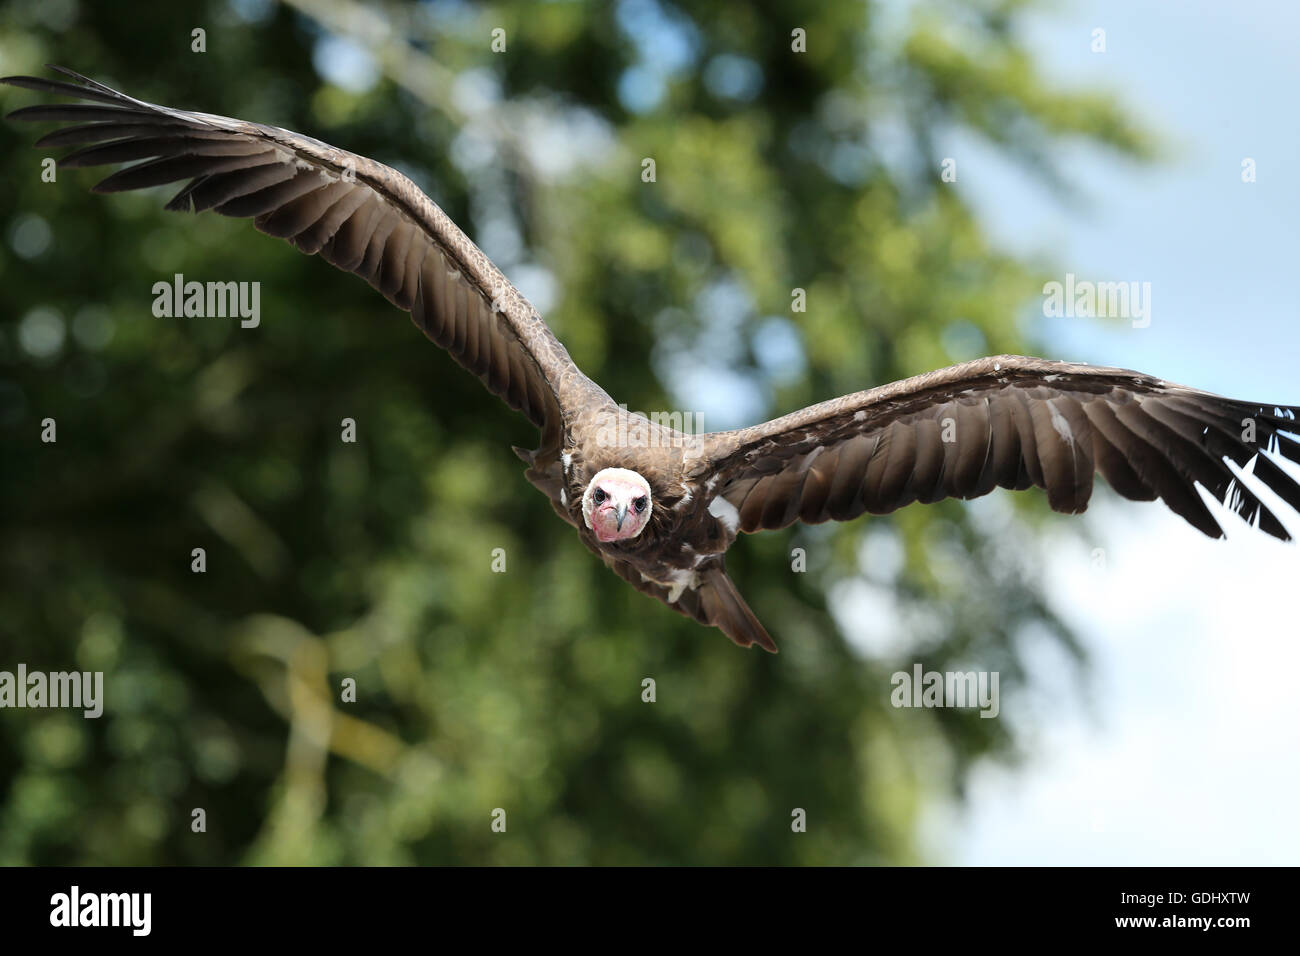 Close up of a White-headed vulture in flight Stock Photo